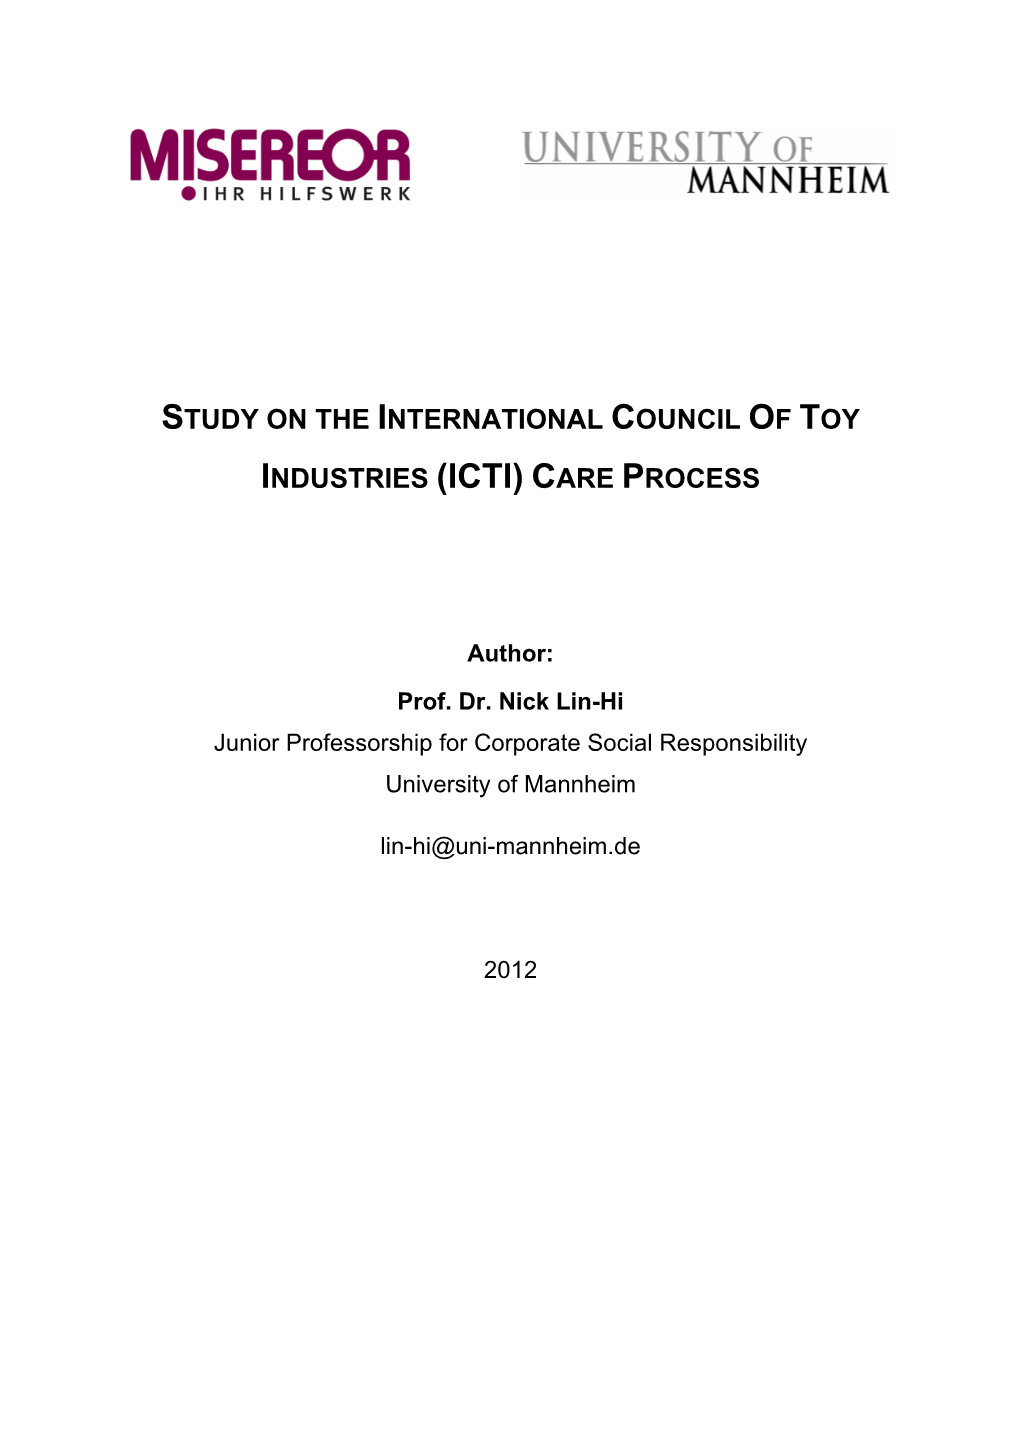 Study on the International Council of Toy Industries (Icti) Care Process